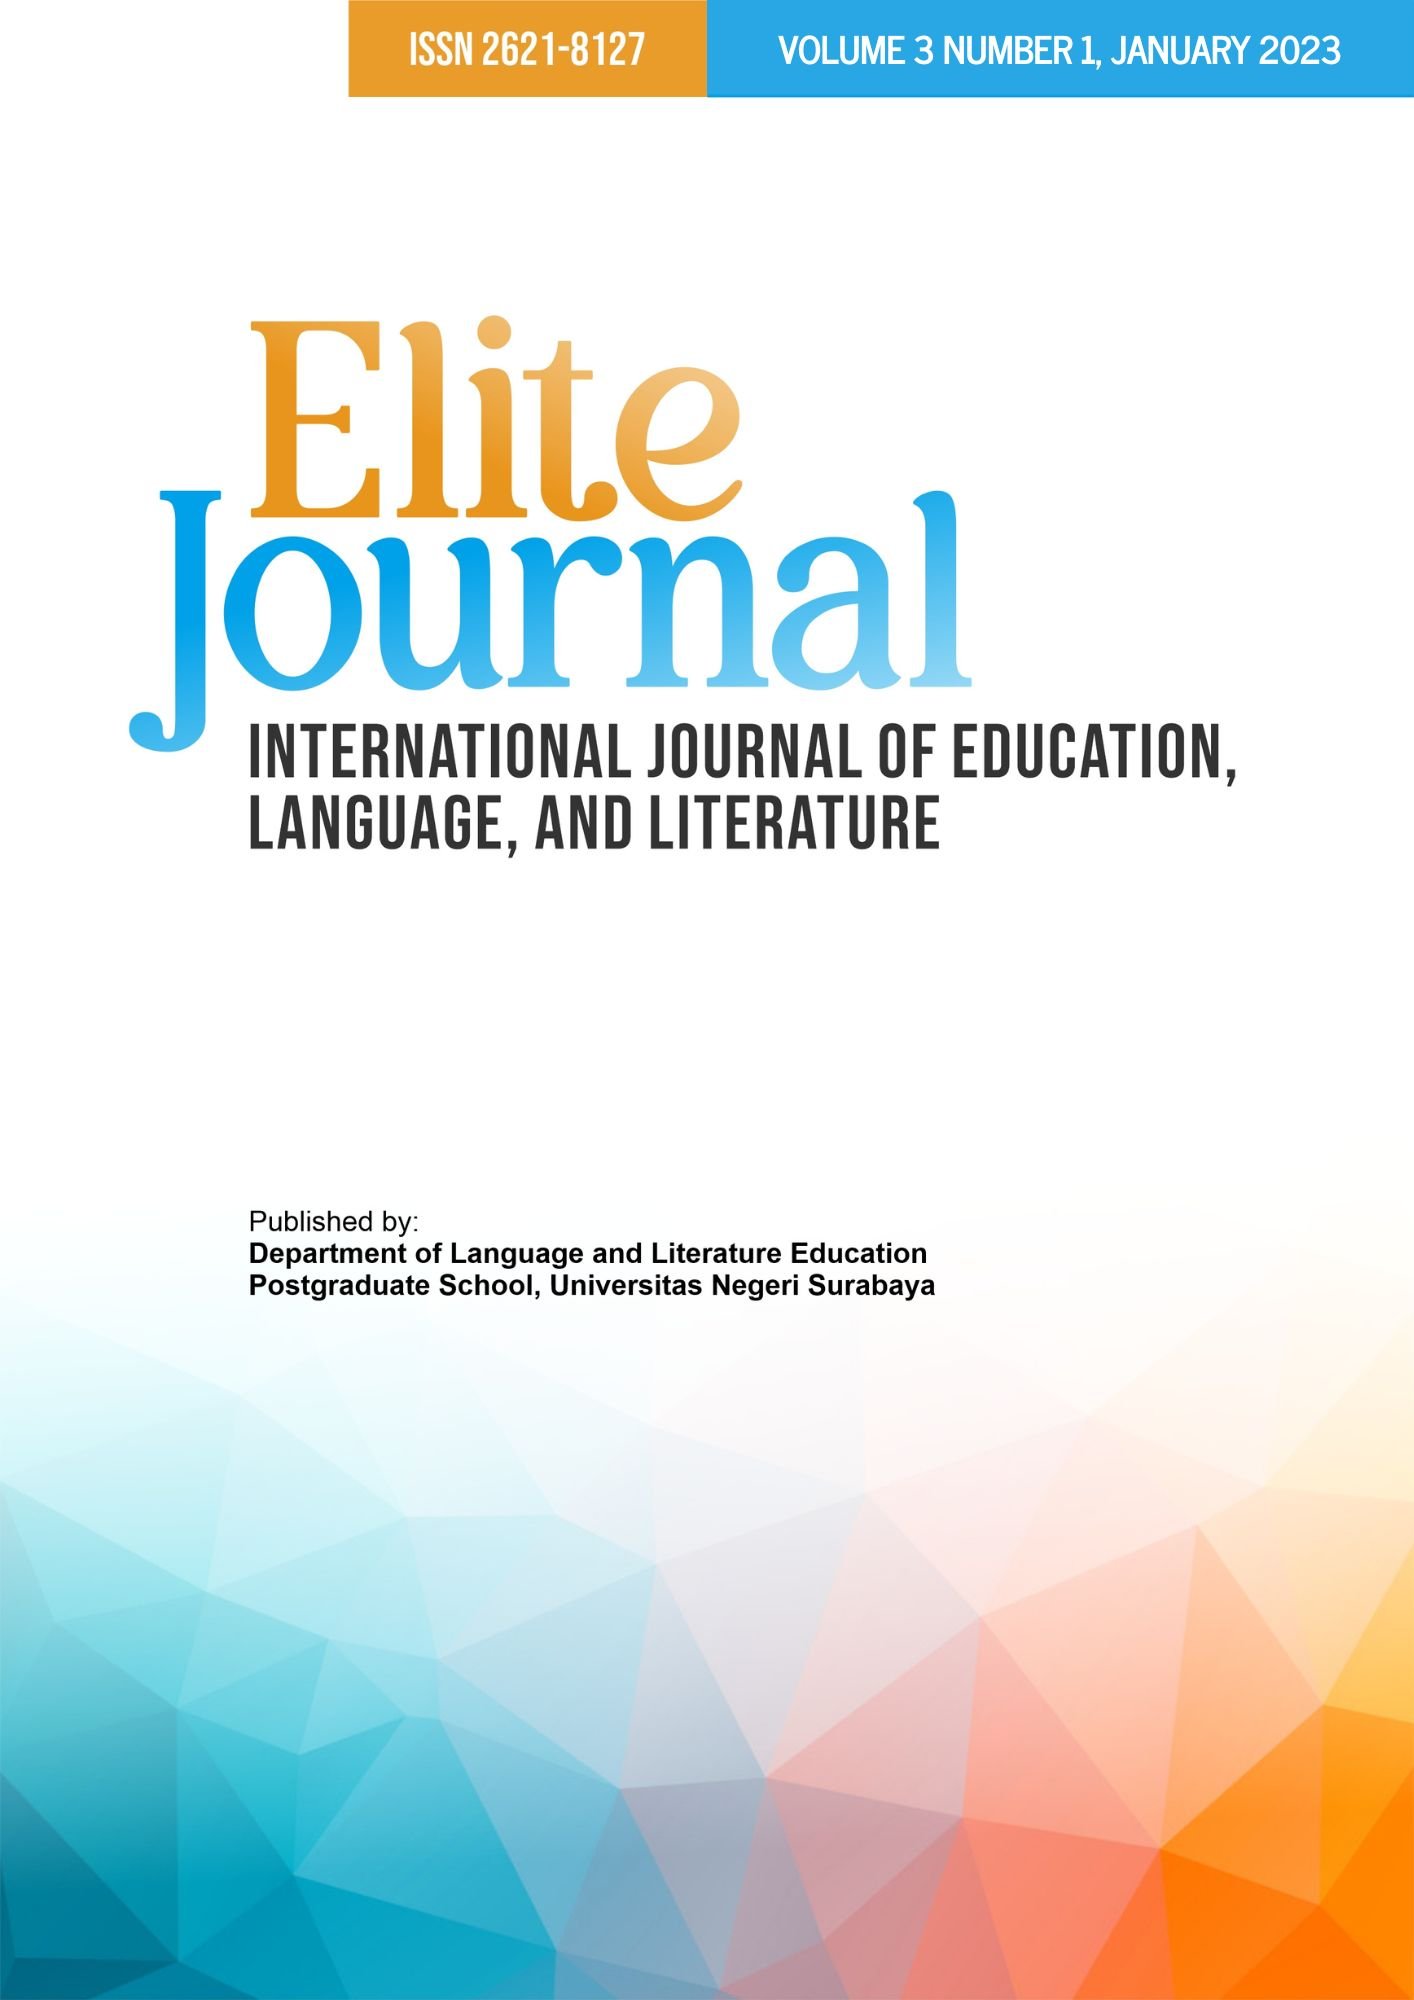 					View Vol. 3 No. 1 (2023): ELite Journal (Volume 3 Number 1, January 2023)
				